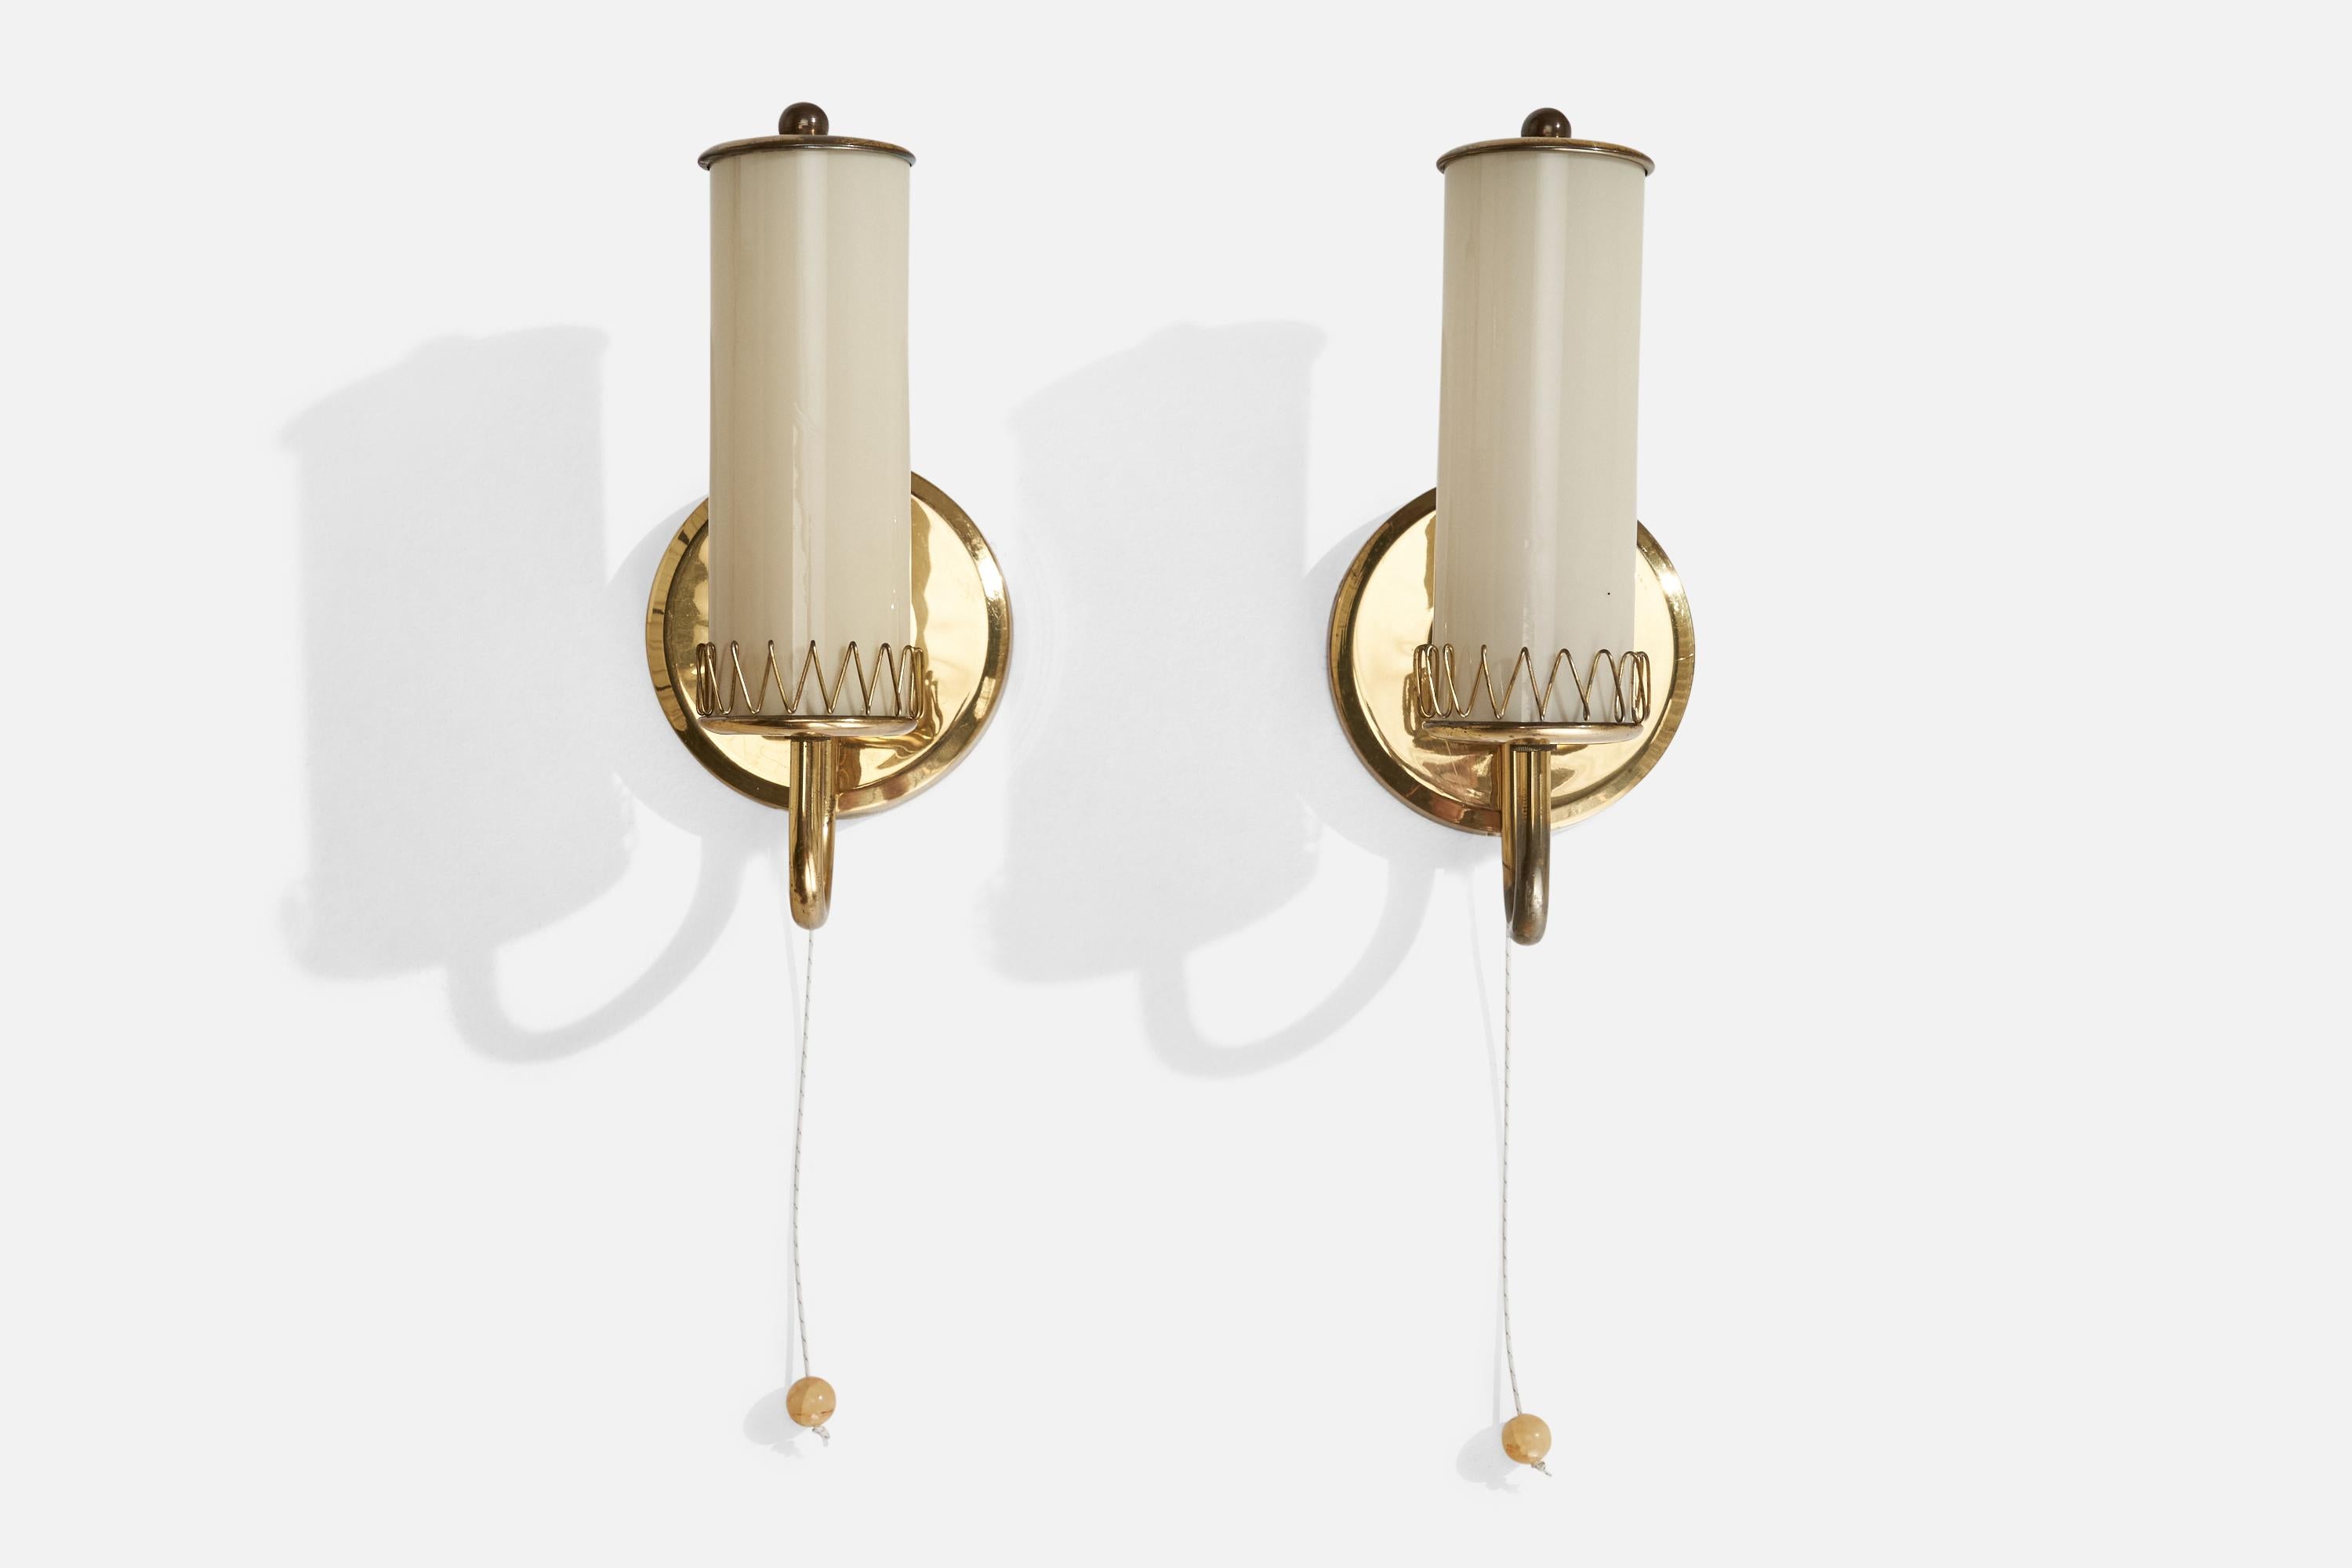 A pair of brass and opaline glass wall lights designed and produced in Austria, c. 1950s.

Overall Dimensions (inches): 9.25” H x 4.44” W x 4.37” D
Back Plate Dimensions (inches): 4.44” H x 0.57” D
Bulb Specifications: E-14 Bulb
Number of Sockets: